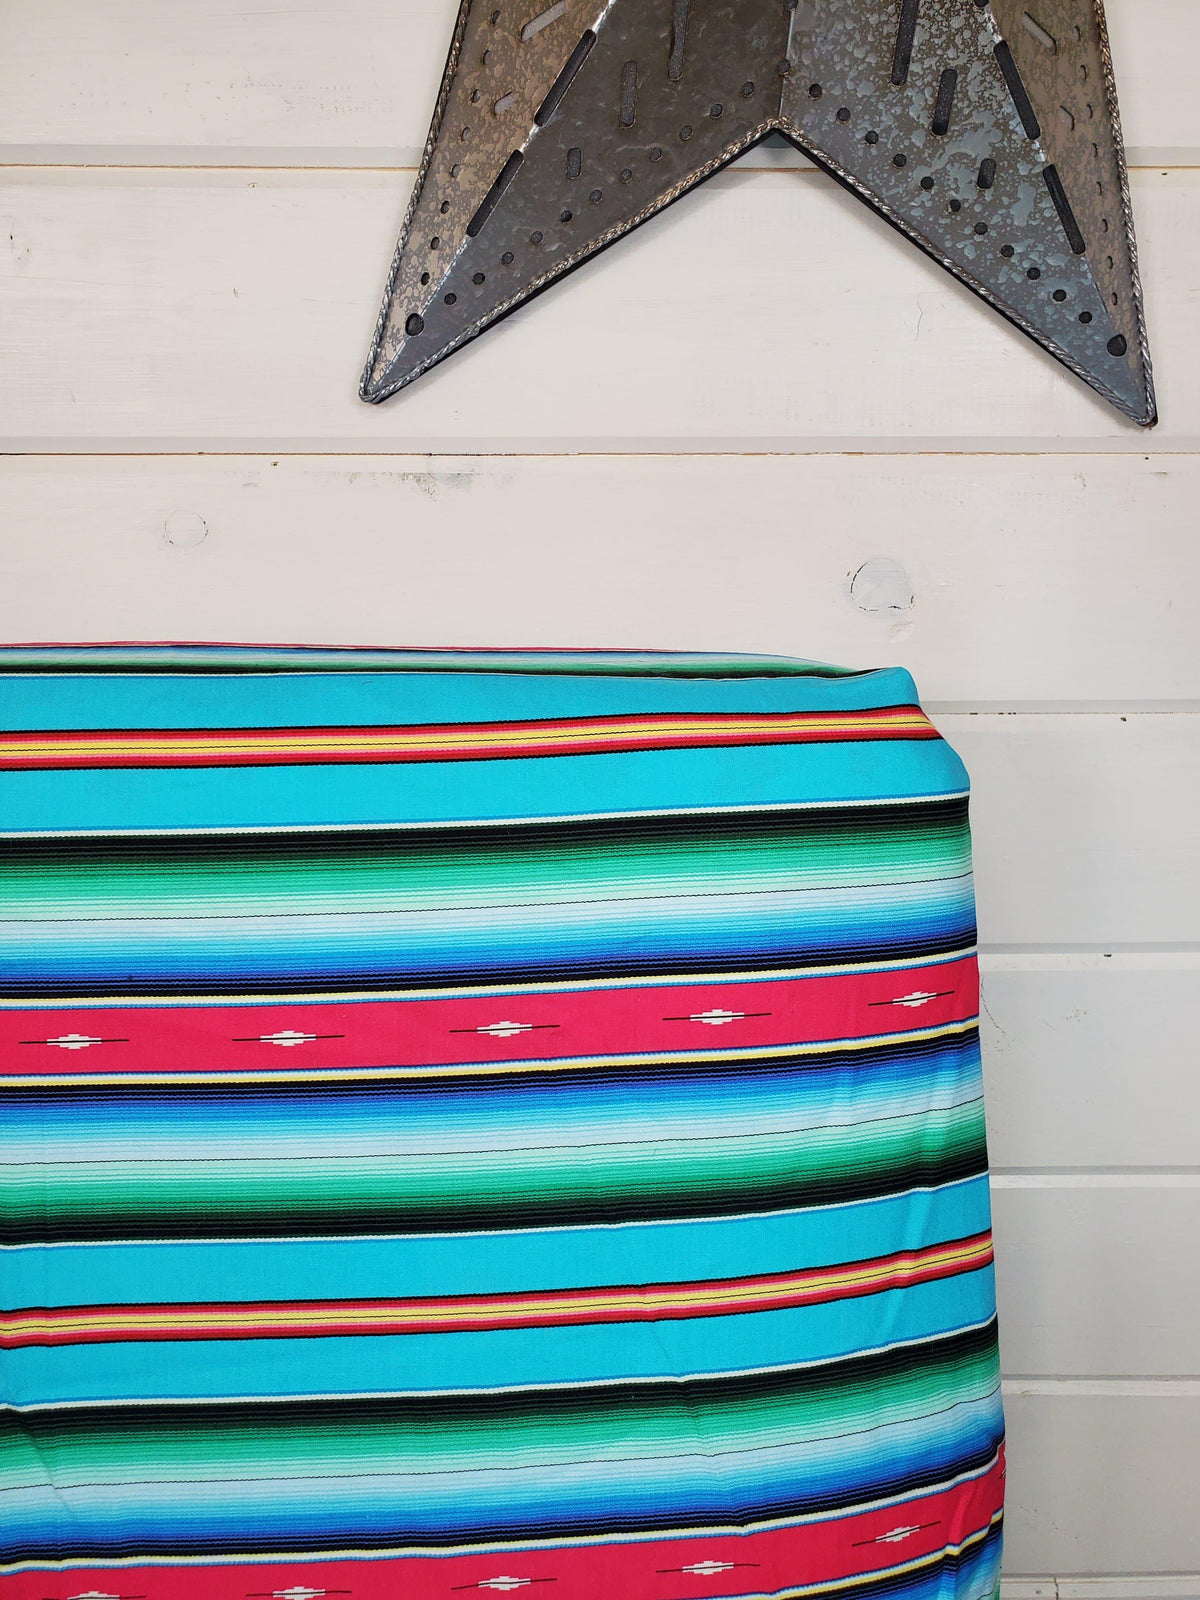 Fitted Sheet - Serape in fiesta : All Bed Sizes - DBC Baby Bedding Co 